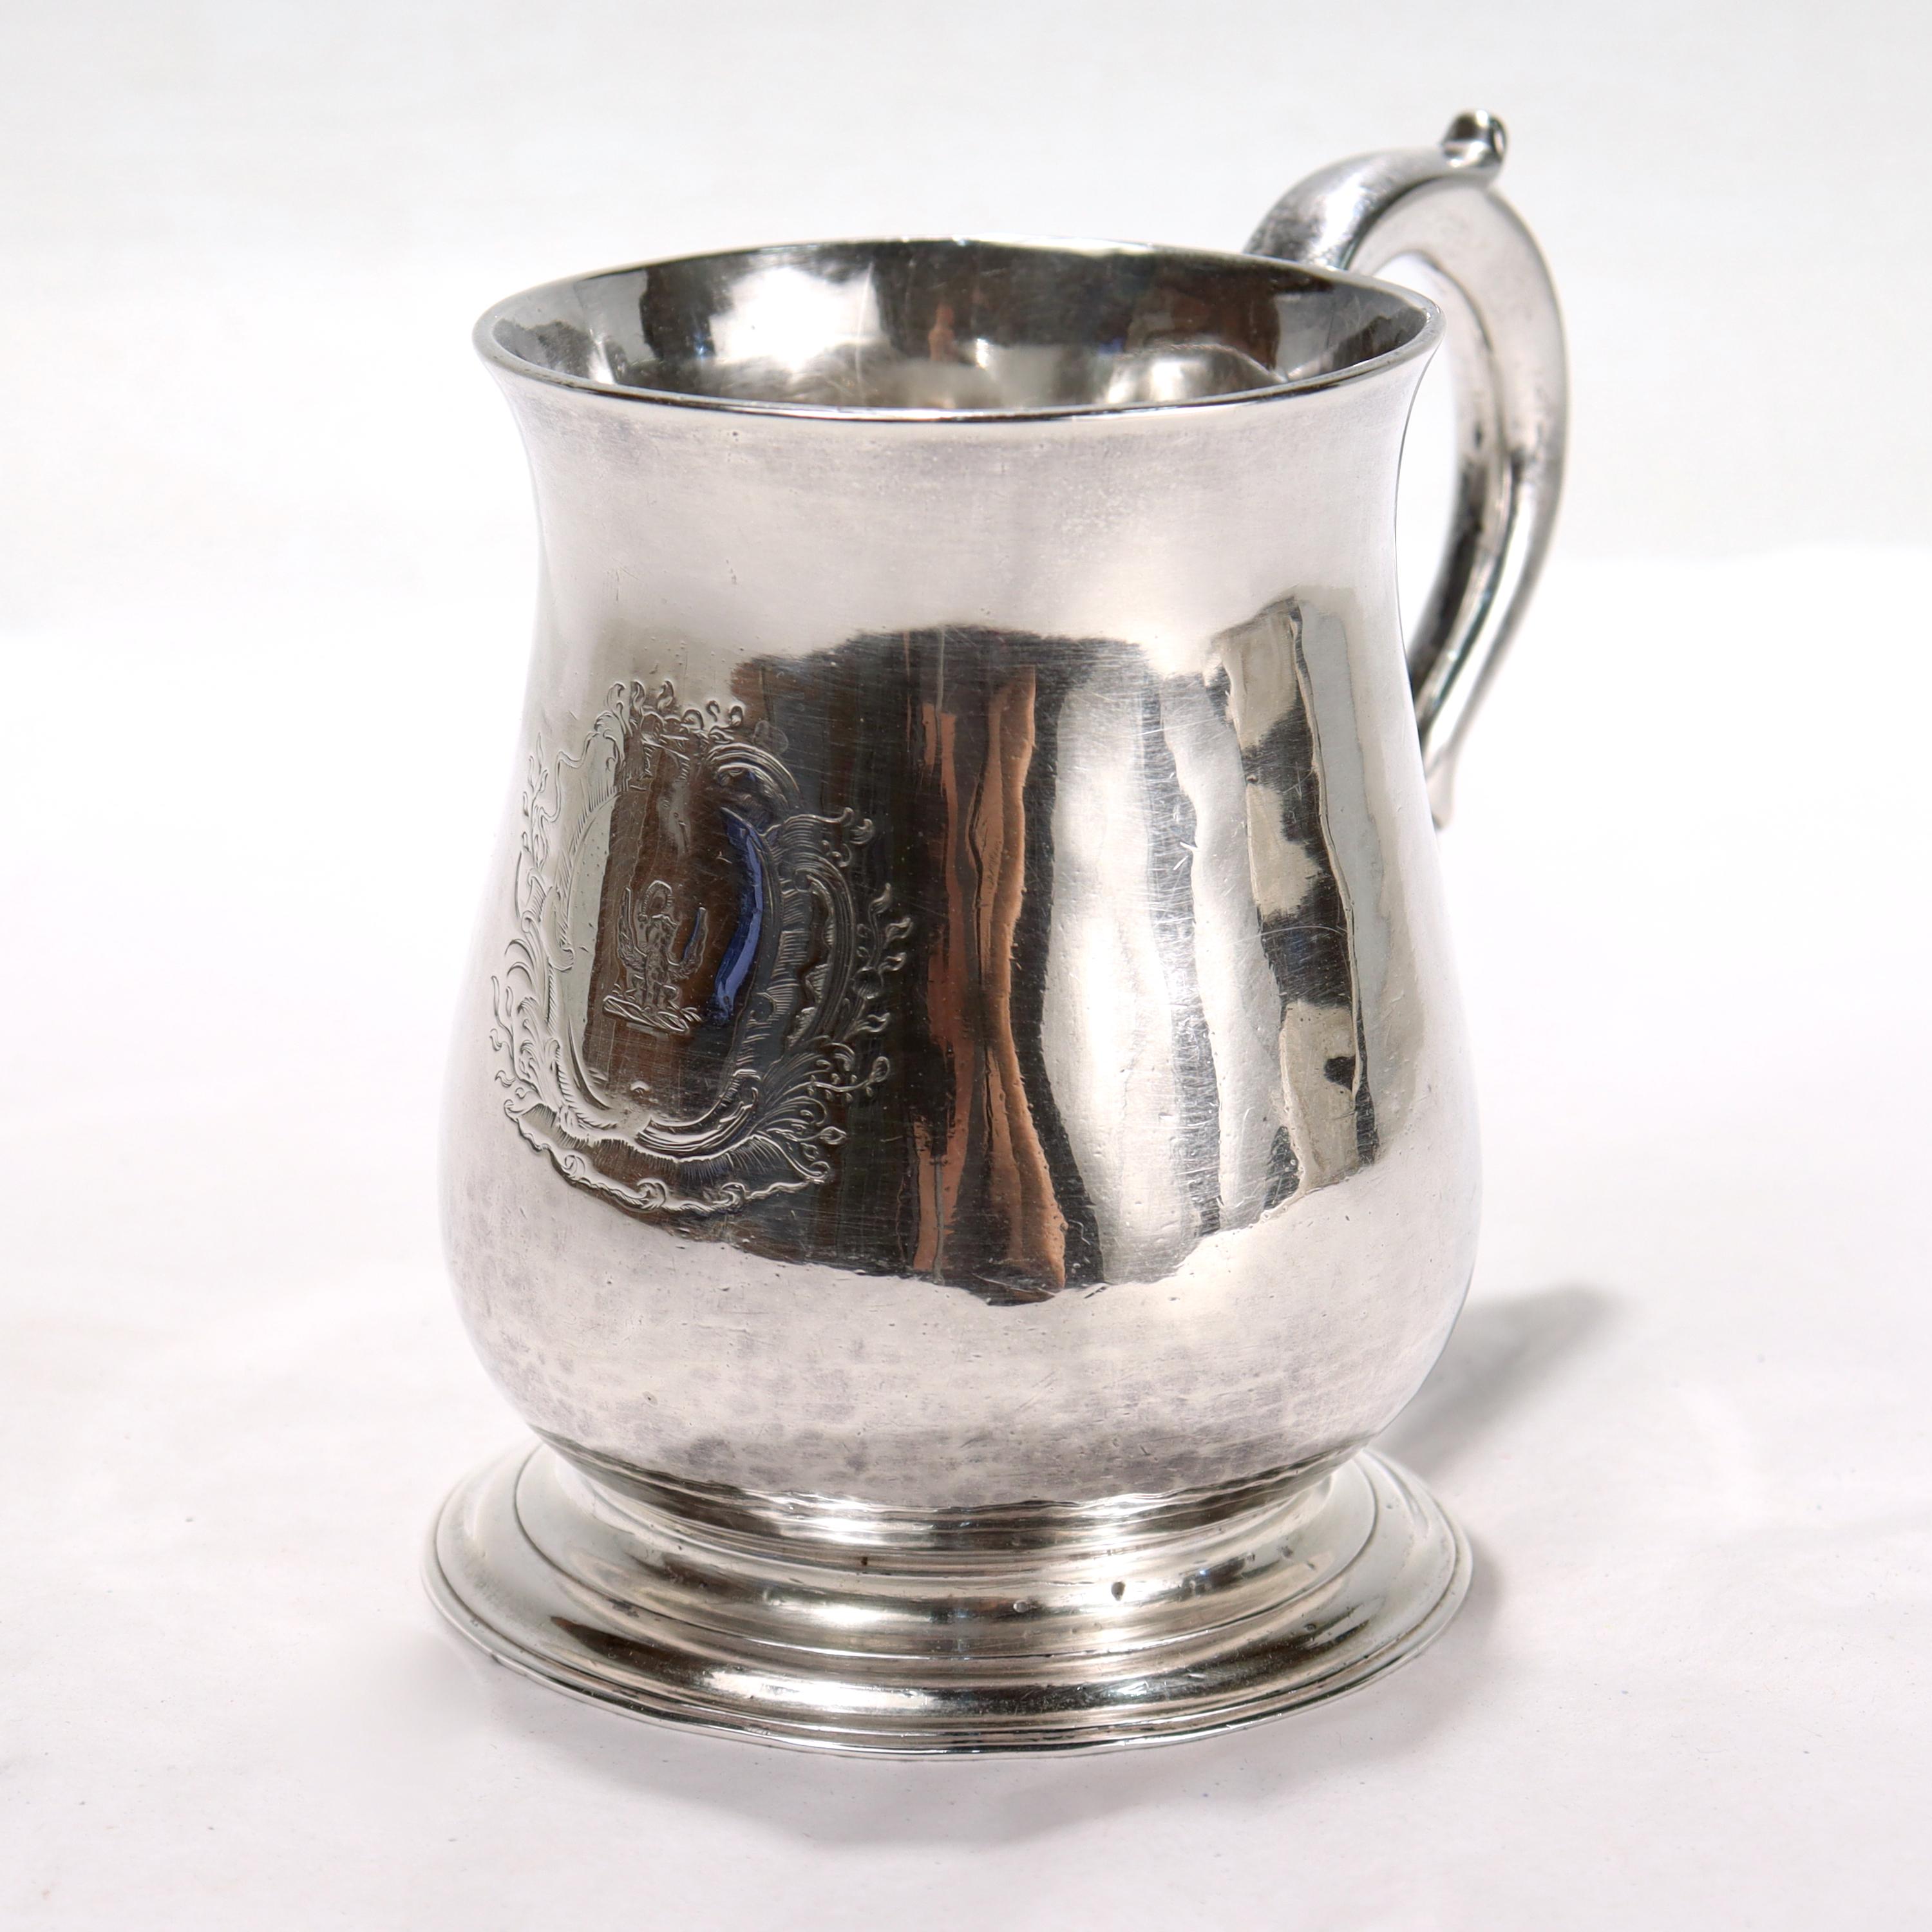 A wonderful George II baluster form sterling silver 1/2 pint mug.

By Richard Gurney & Thomas Cook in 1733.

With an engraved family crest to the front & the applied cast double scroll handle to the reverse. 

Simply a lovely English sterling silver